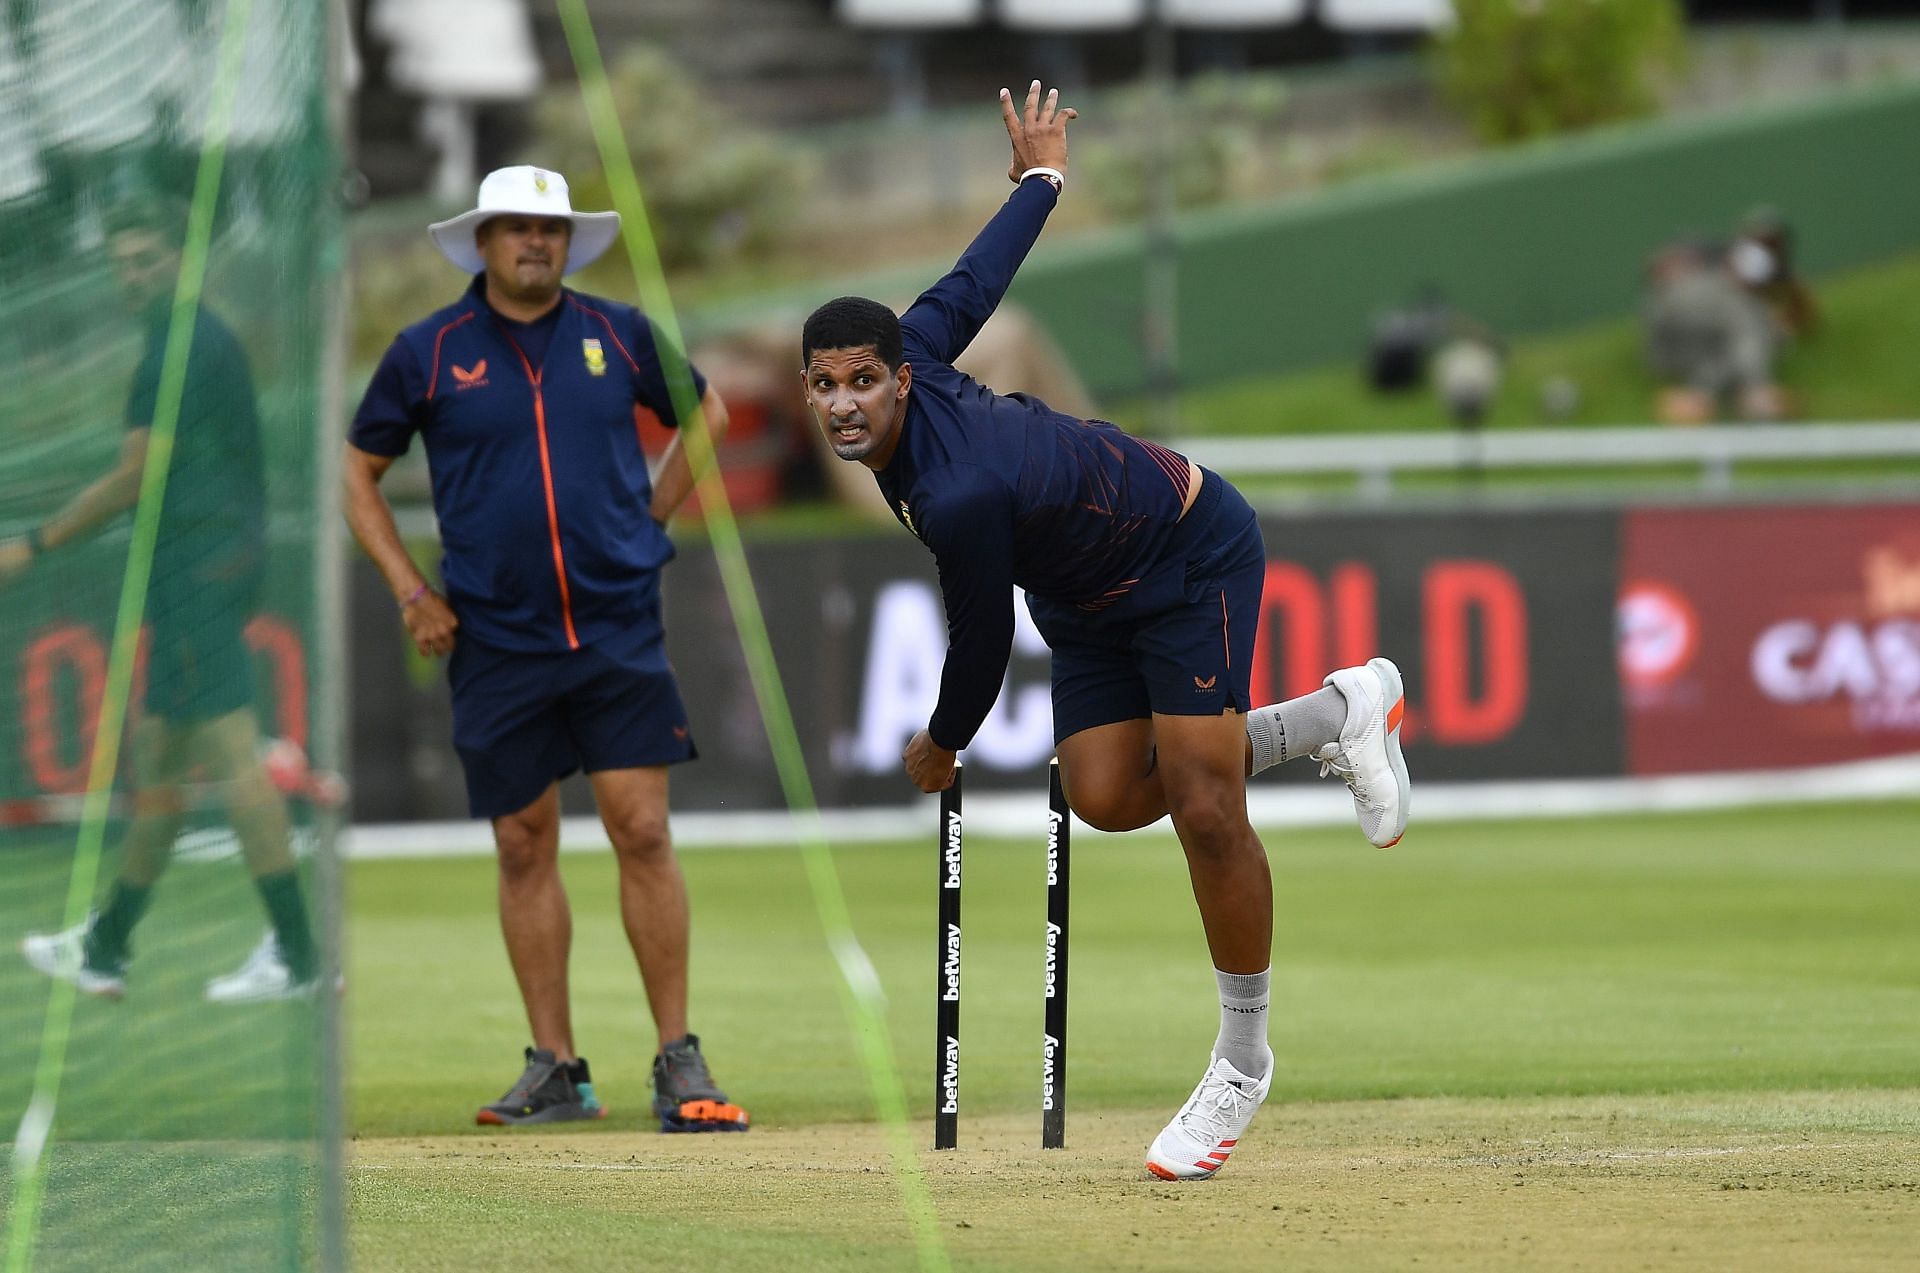 Beuran Hendricks could prove to be important here